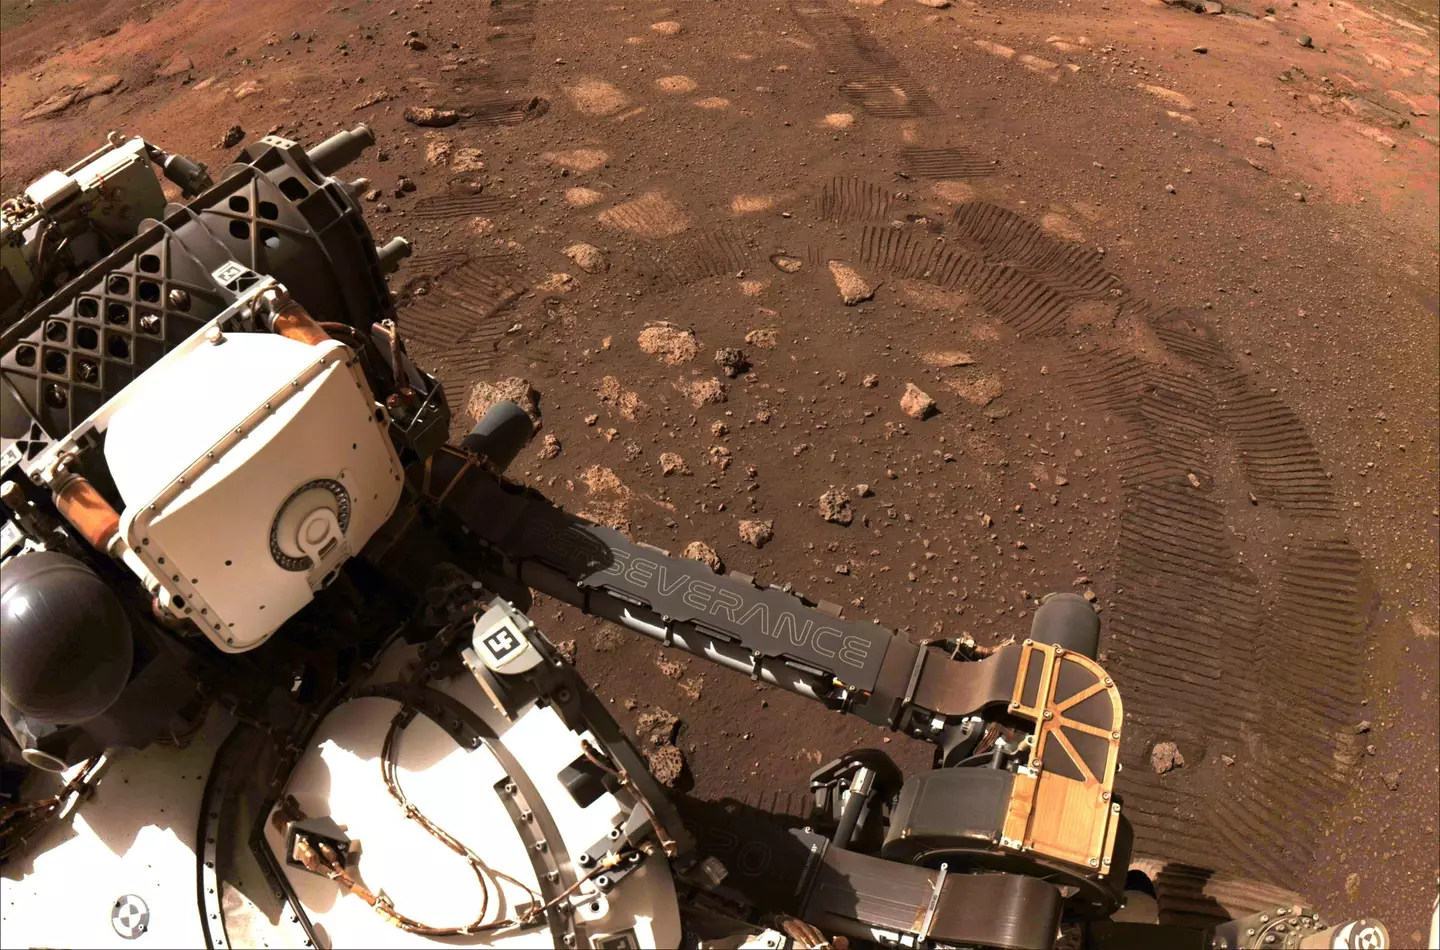 Perseverance roving on Mars during its first drive.